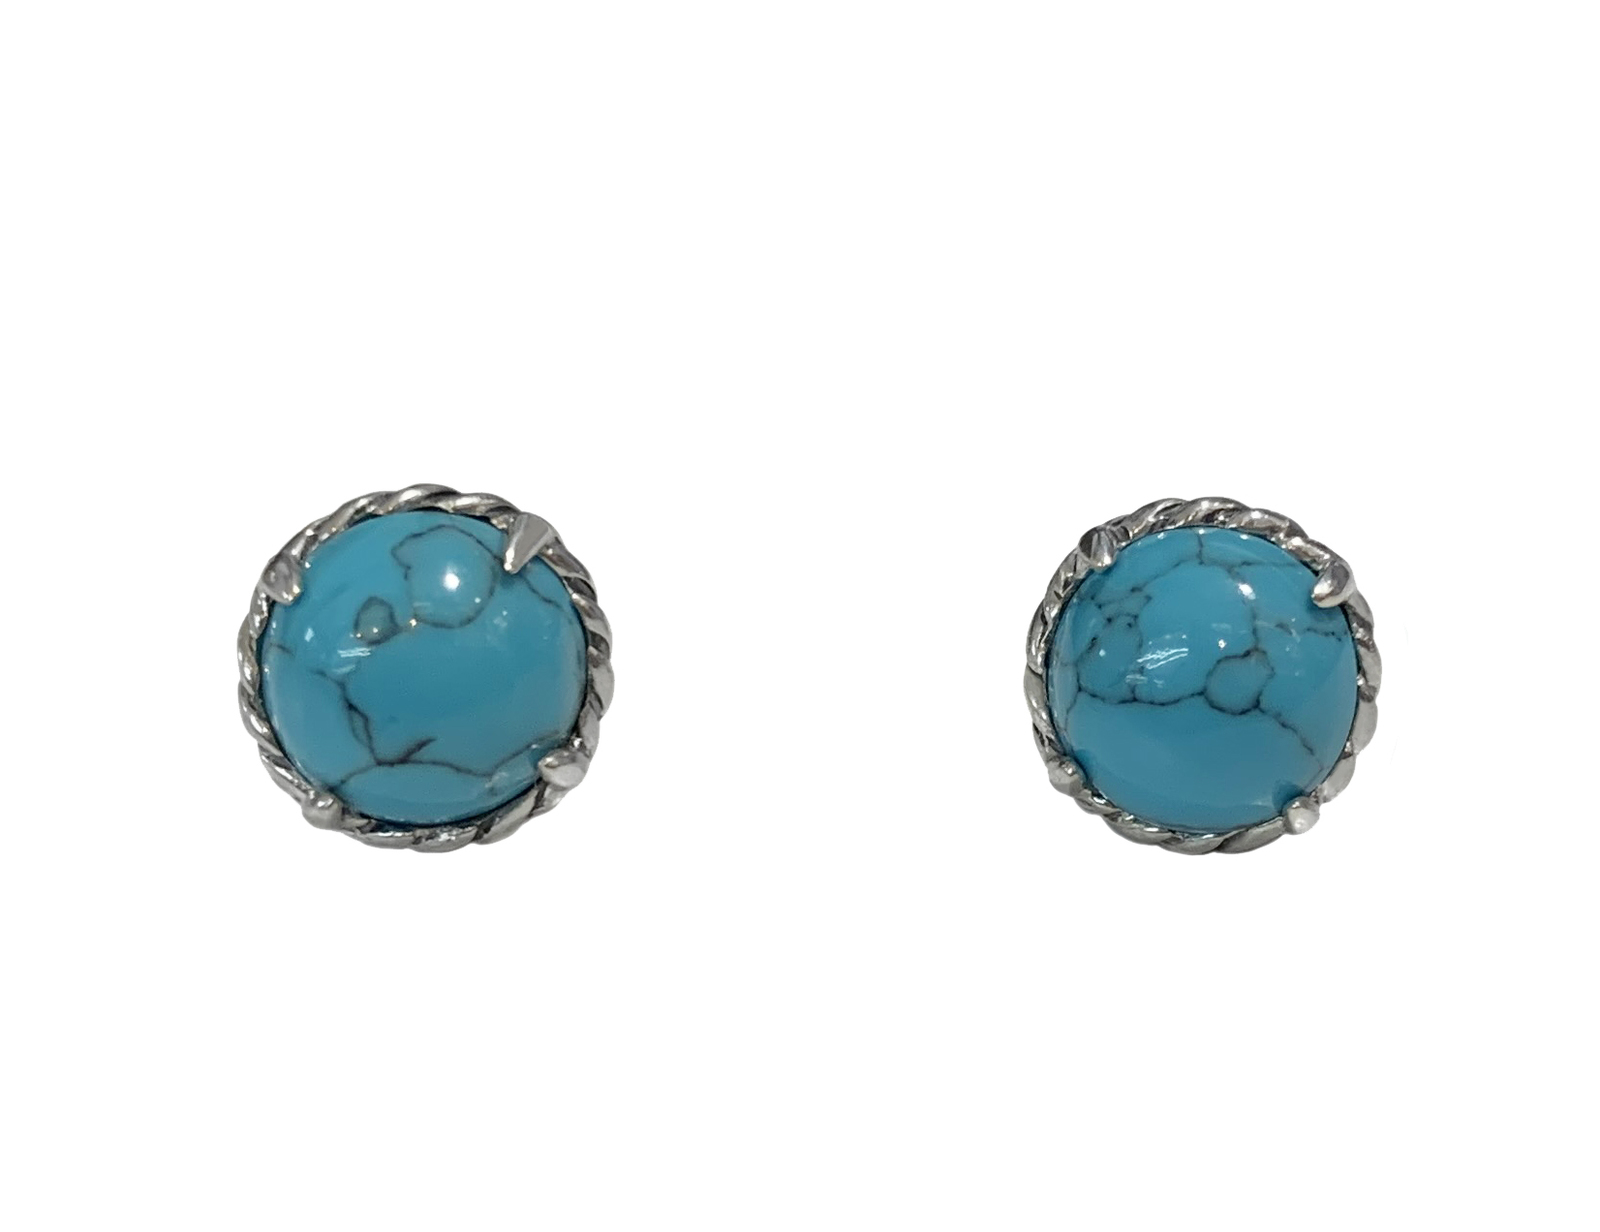 Primary image for David Yurman Chatelaine Earrings With Turquoise